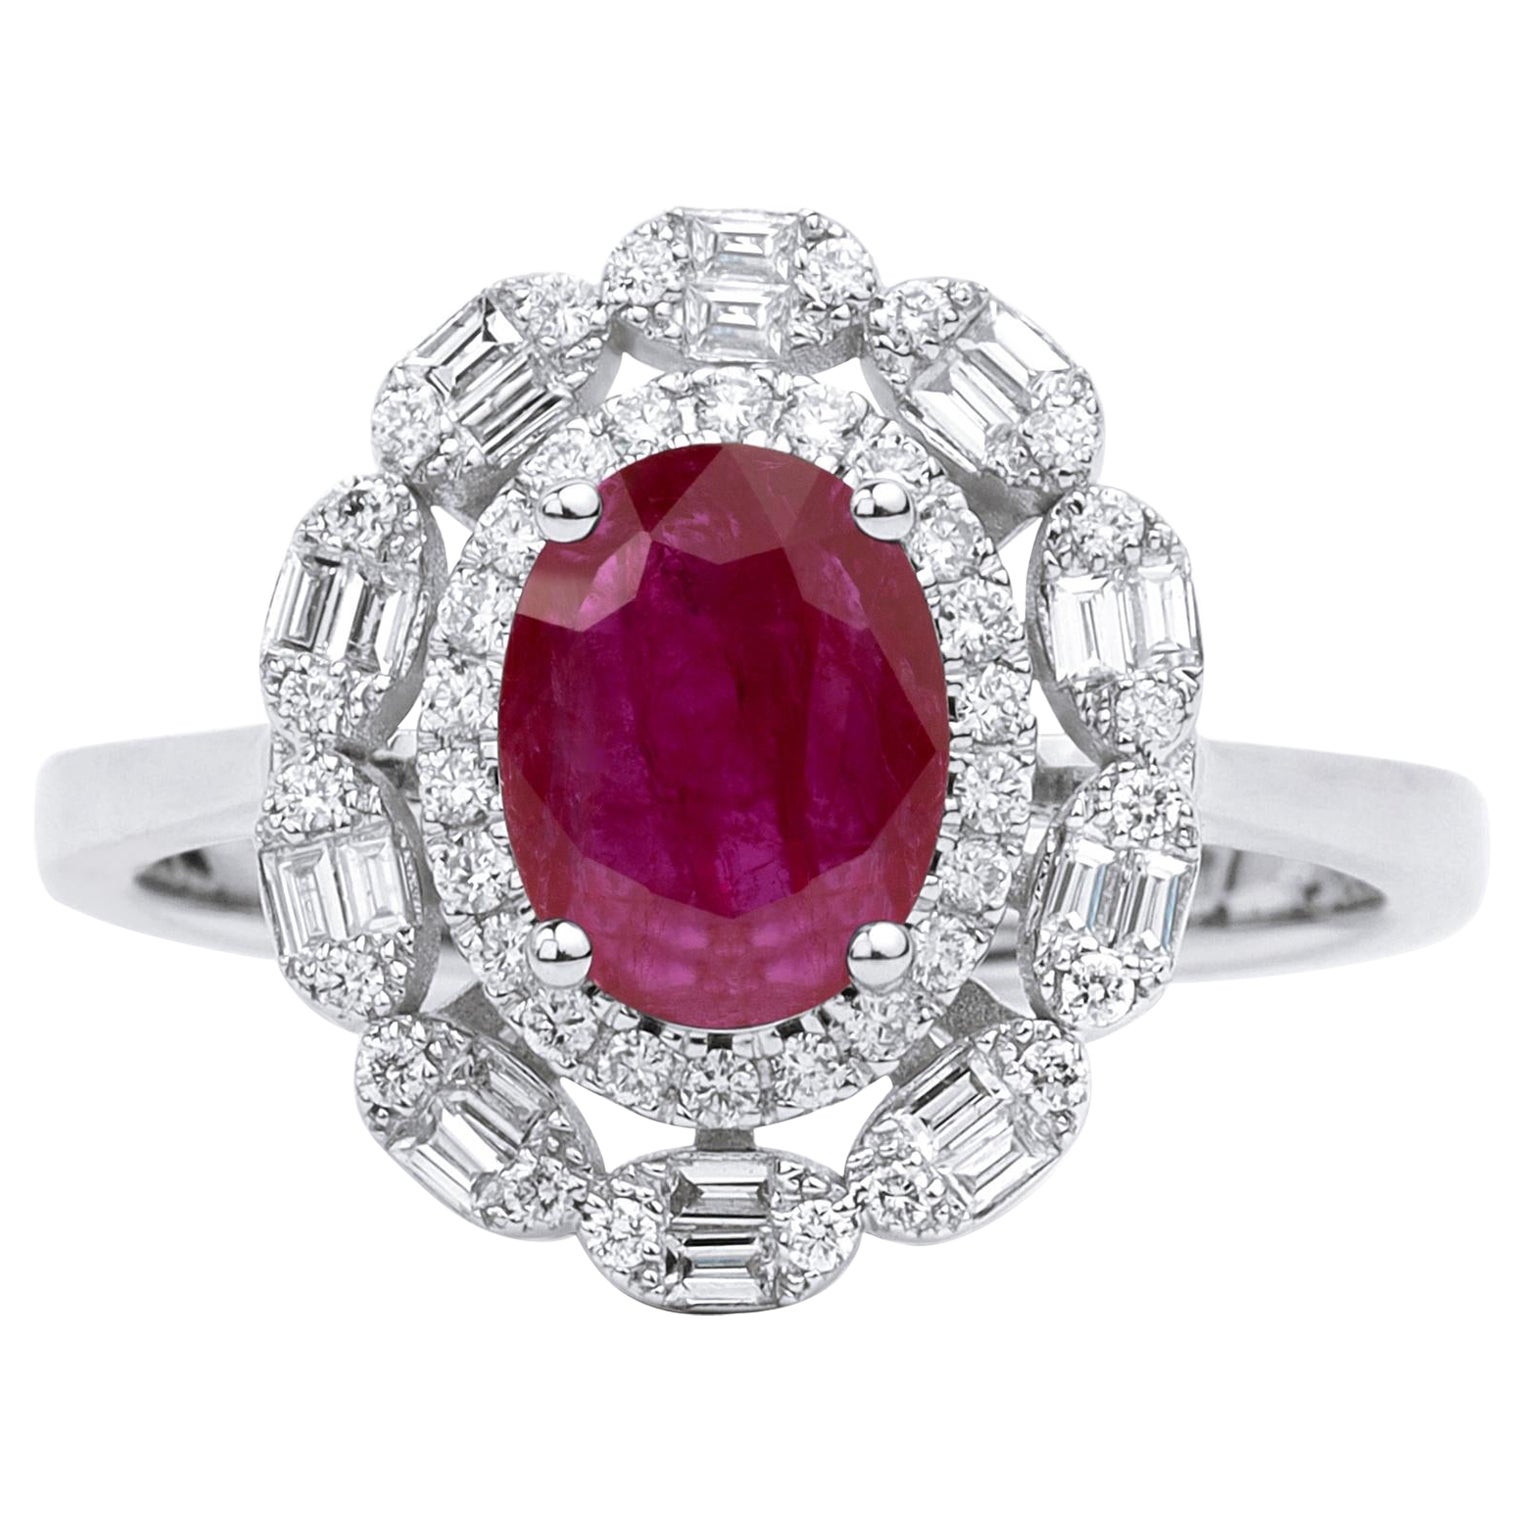 Oval Red Ruby Diamond Halo Cocktail Engagement Ring in 18 karat White Gold